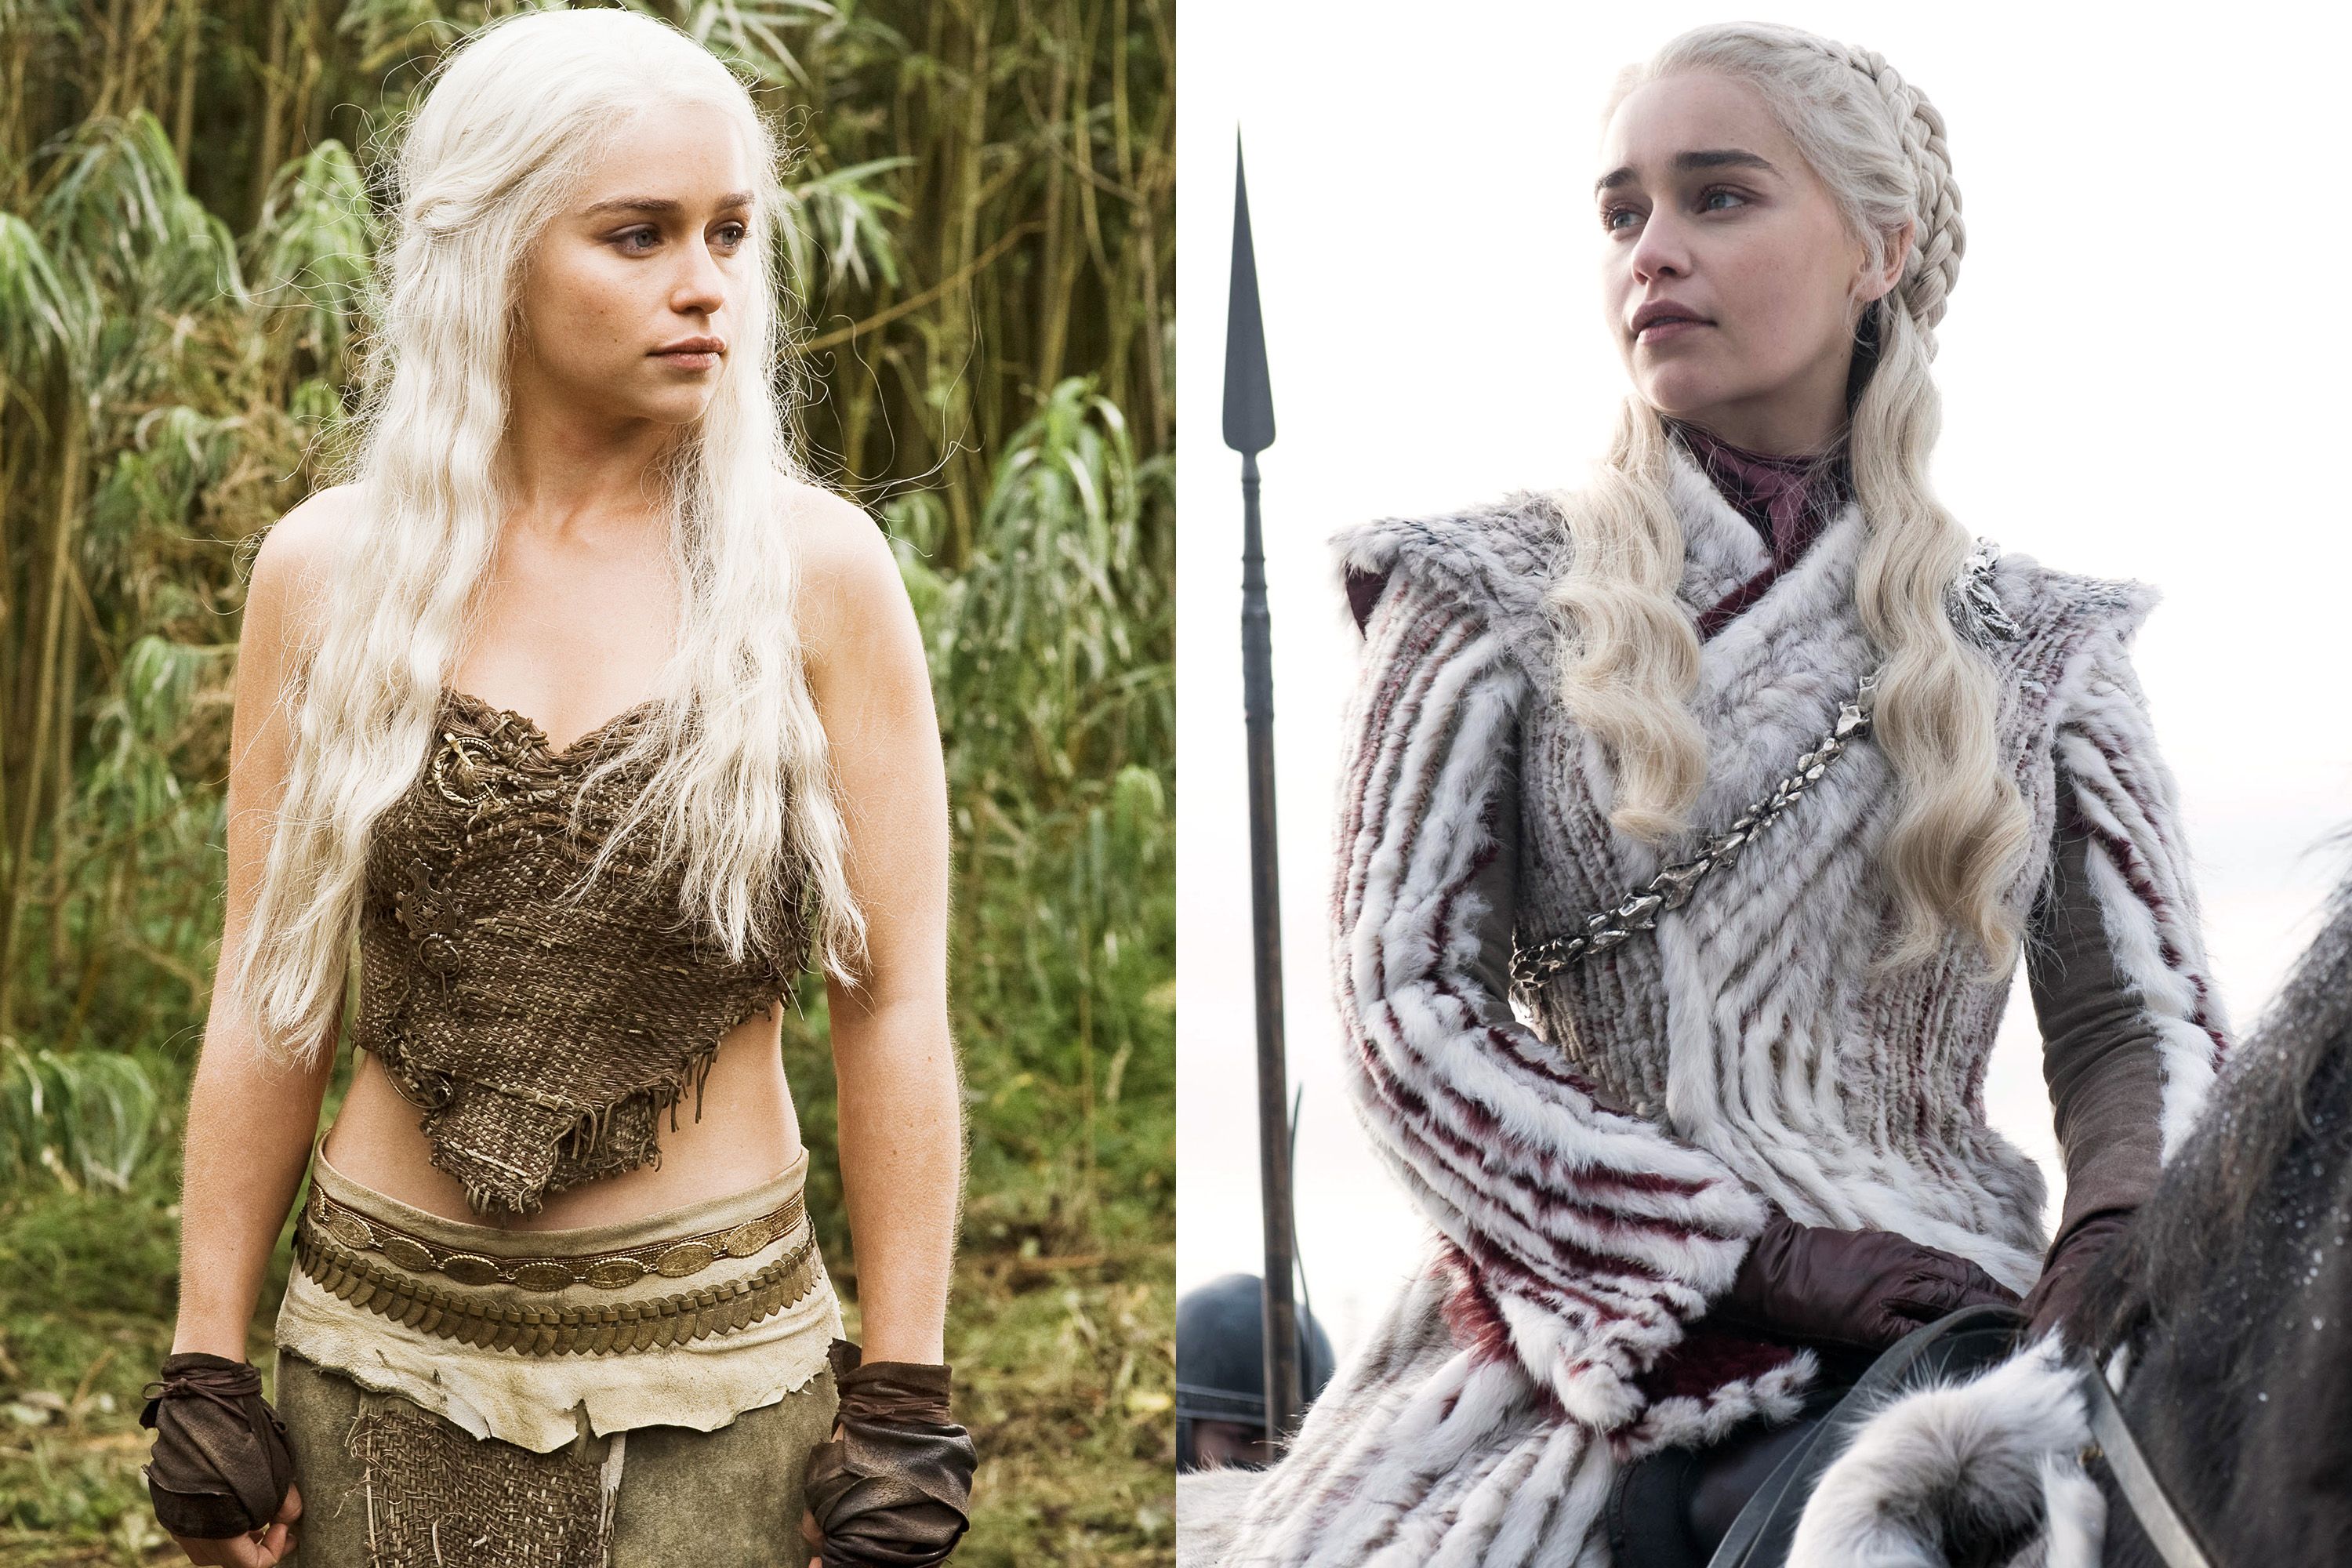 Then and Now: 'Game of Thrones' Characters From Season One